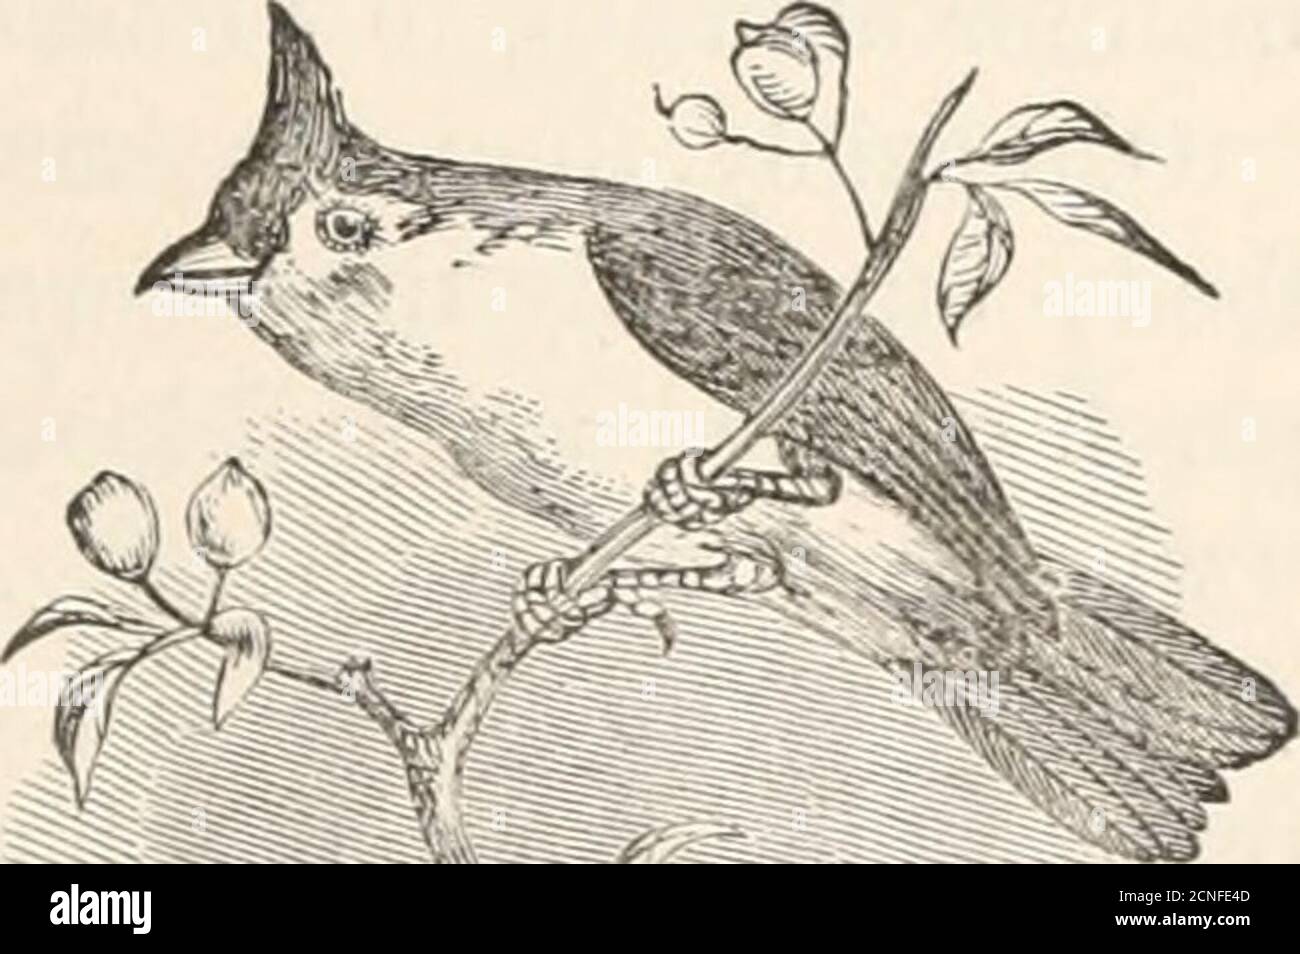 . The birds of New England and adjacent states : ... arranged by a long-approved classification and nomenclature ... with illustrations of many species of the birds, accurate figures of their nests and eggs . andslightly convex; tarsus but little longer than middle toe; crown and throat gener-ally black. PARUS ATRICAPILLUS. — Linncms. The Black-cap Titmouse; Chick-a-dee. Parus atricapittus, Linnaeus. Syst. Nat., I. (1766) 341. Wilson, Am. Orn., I(1808) 134. Aud. Orn. Biog., TV. (1838).Parus palustris, Nuttall. Man., I. (1832) 79. Description. Second quill as long as the secondaries; tail very Stock Photo